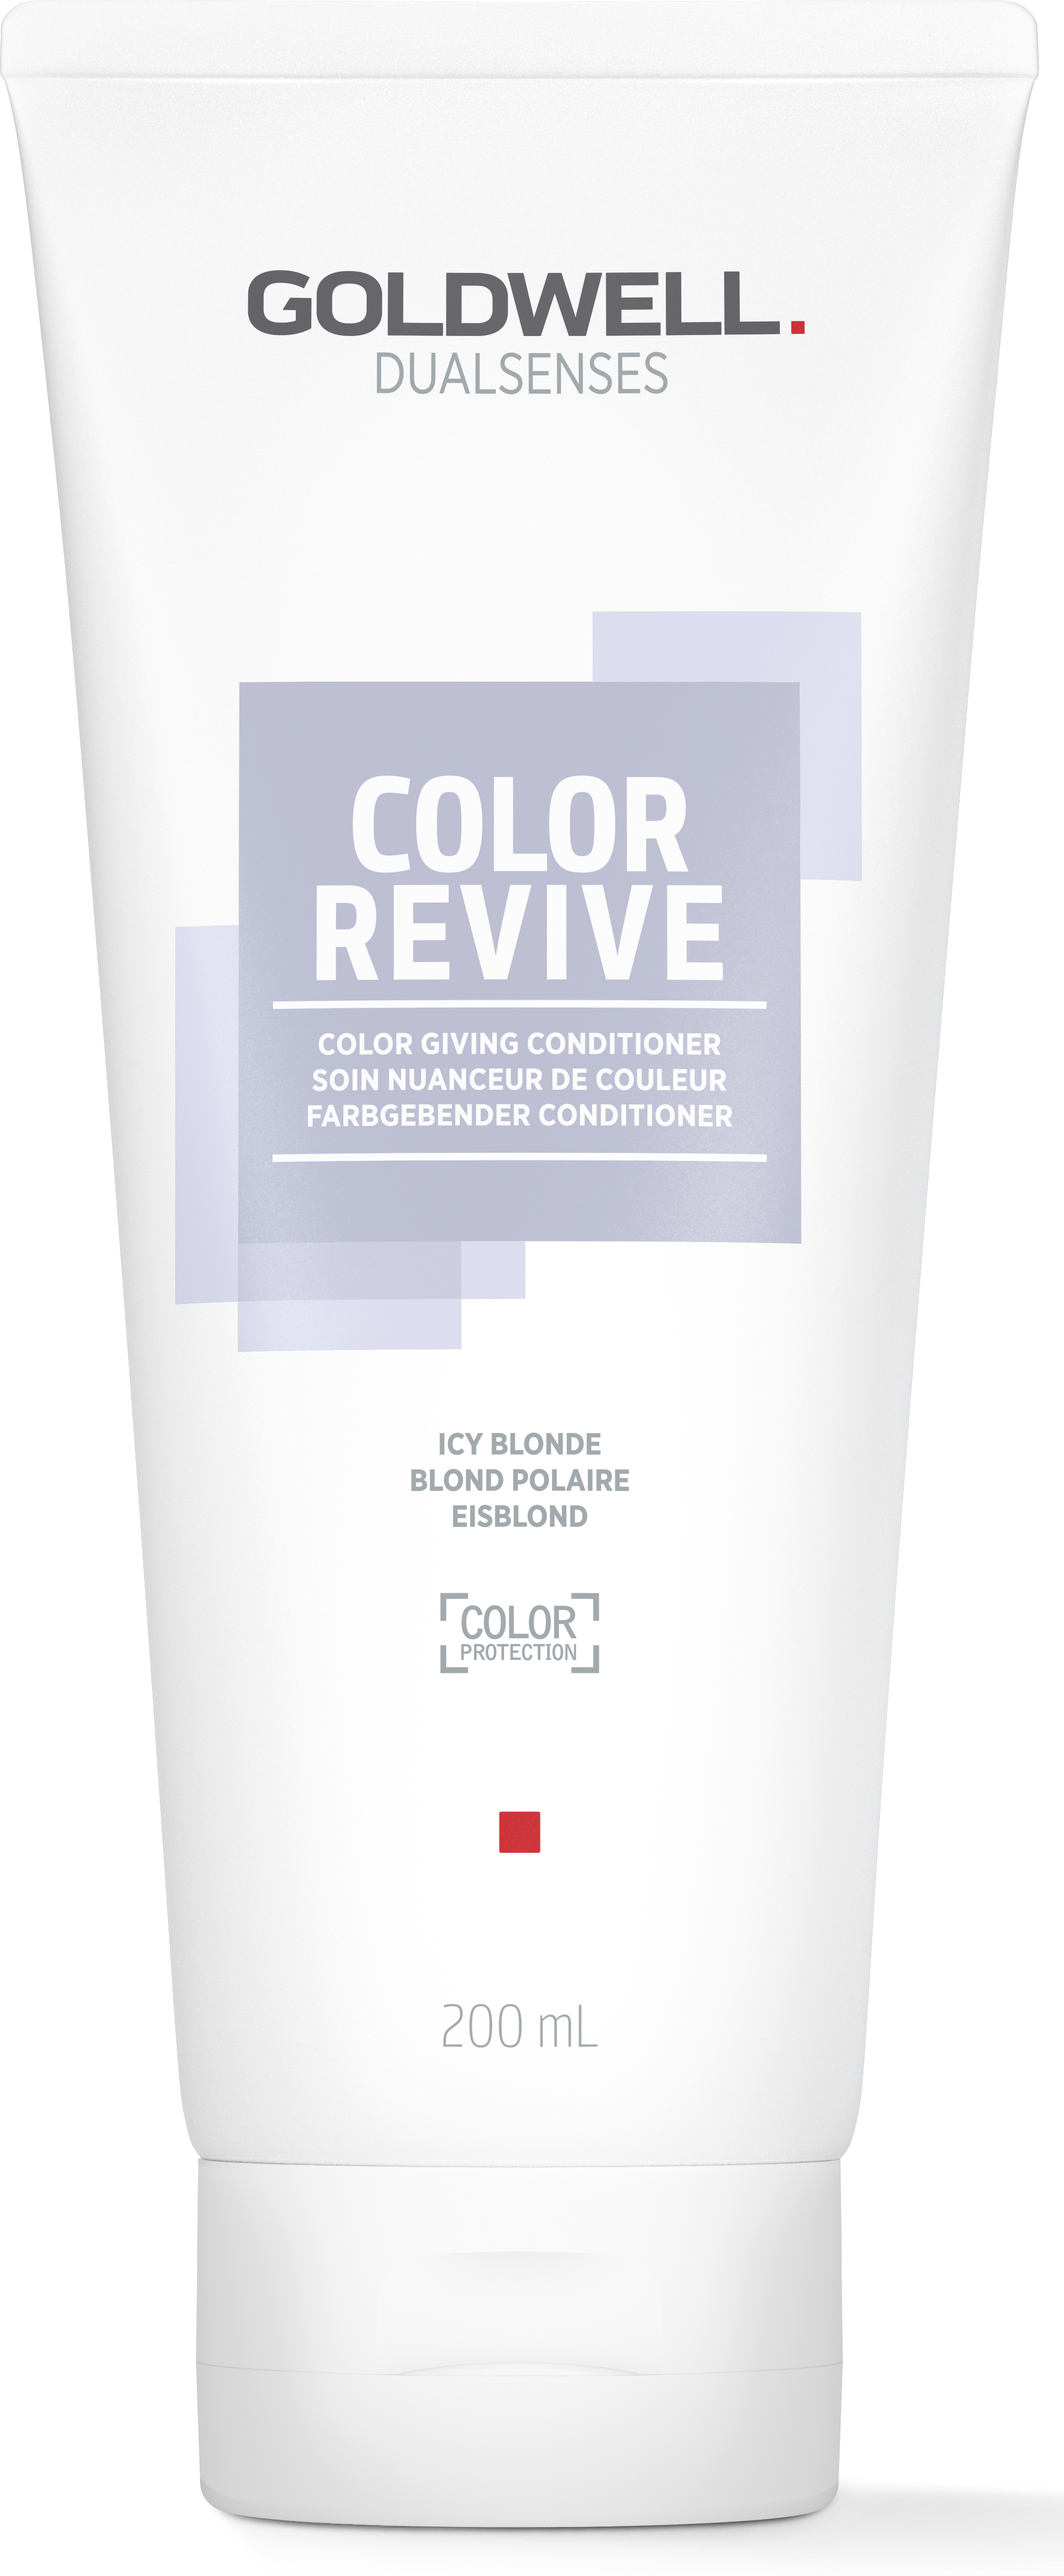 Goldwell Dualsenses Color Revive Color Giving Conditioner Icy Blo